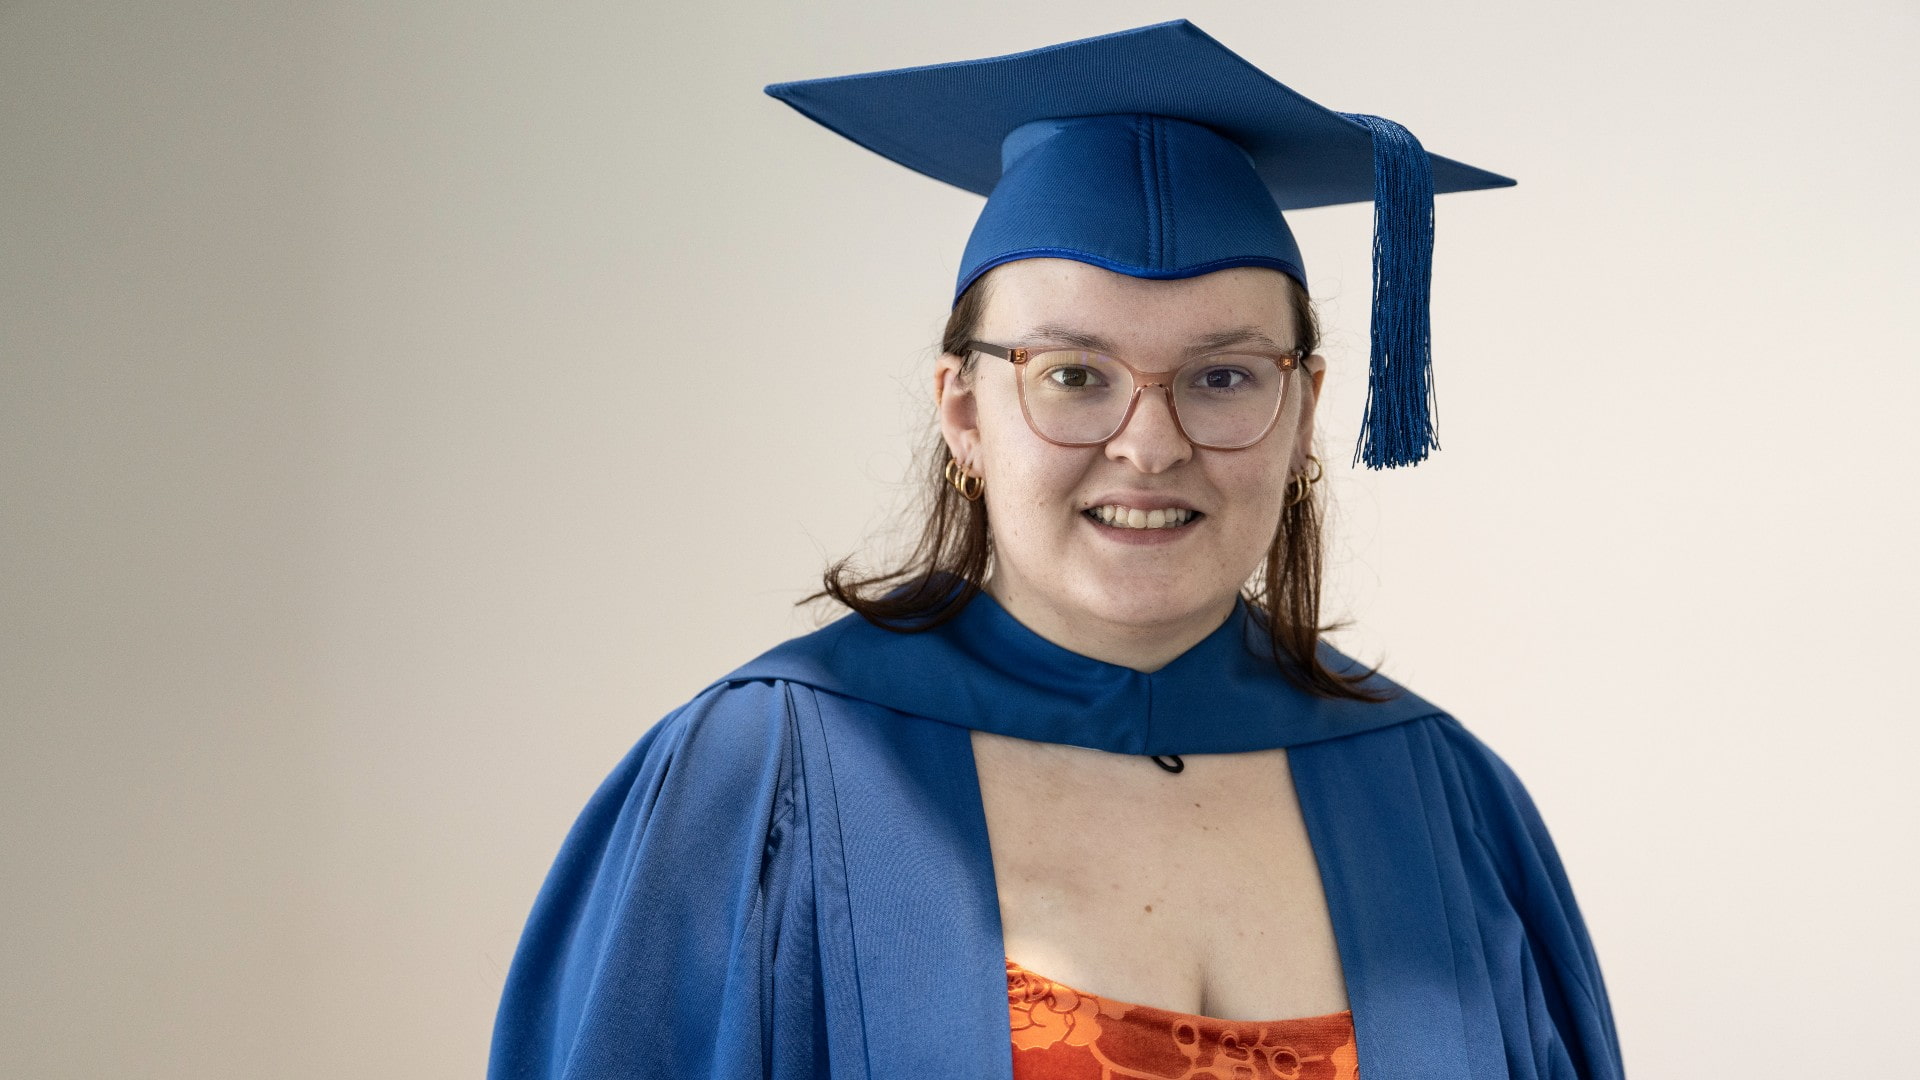 UOW graduate Catie Brown wears a blue graduation cap and stands against a white wall. She is smiling at the camera. Photo: Paul Jones